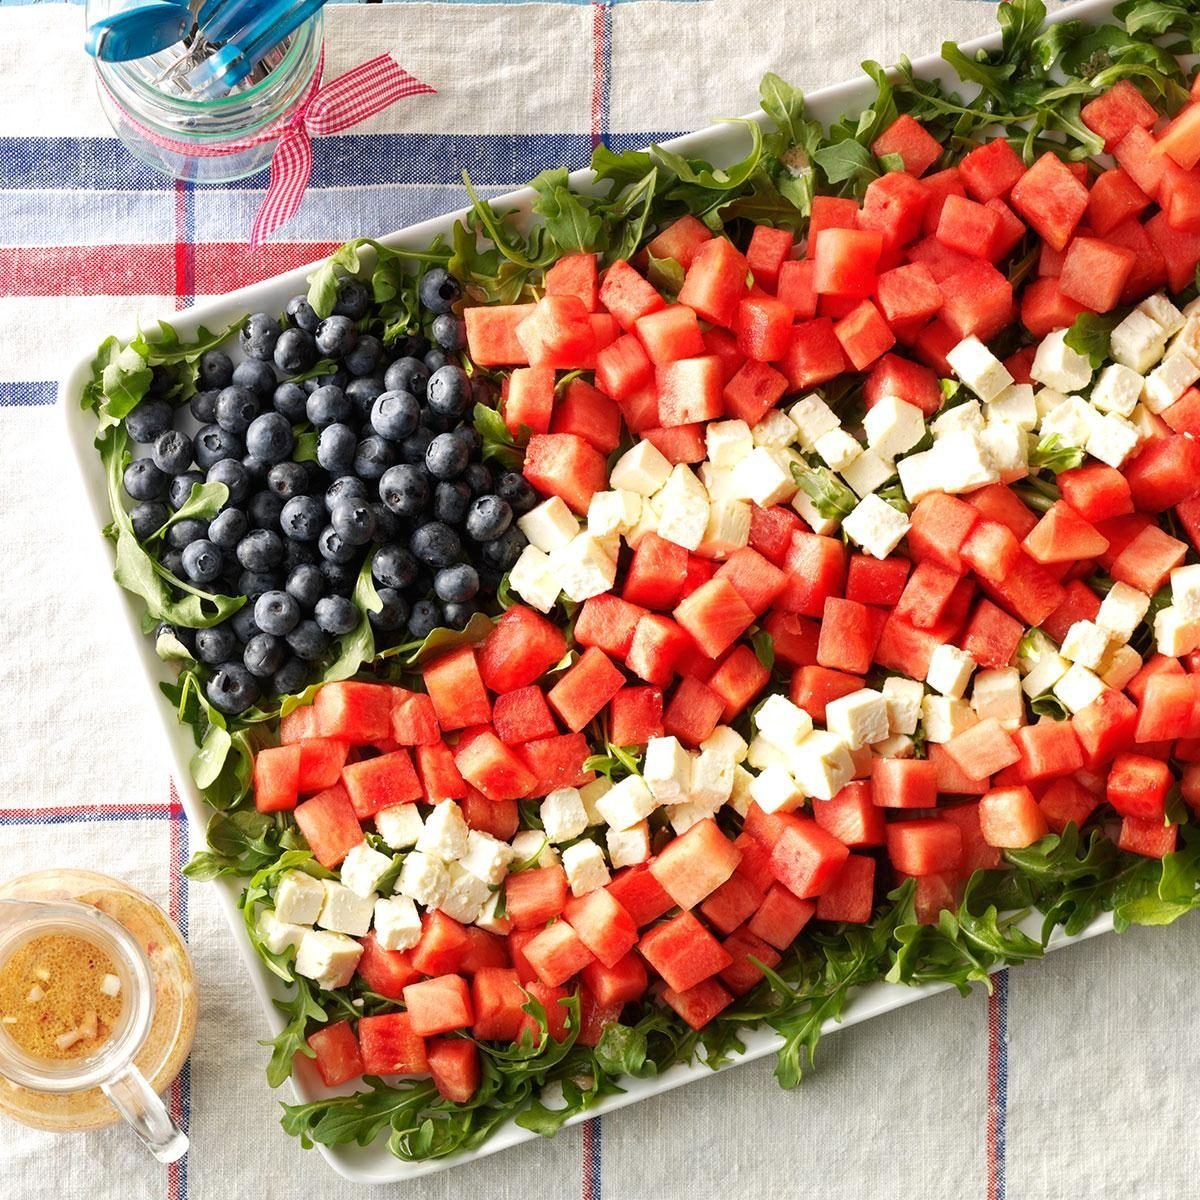 Your Fourth of July Picnic Needs these Side Dishes